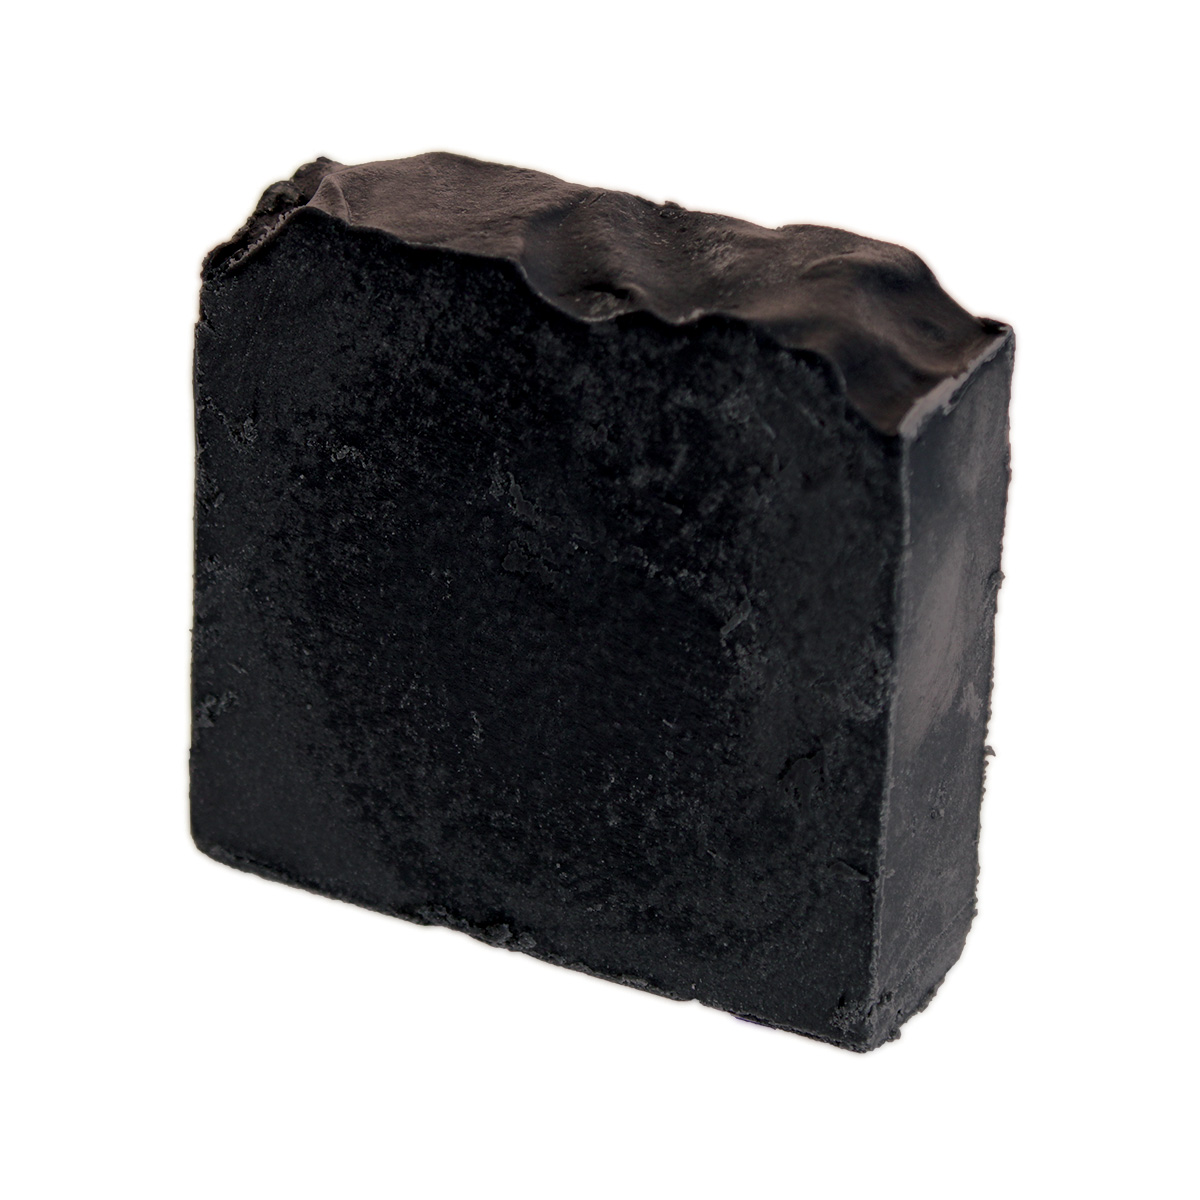 Save 50% Charcoal Soap UpCart - Shipping Protection Hillman Reid Premium Skin and Hair Care Inc.